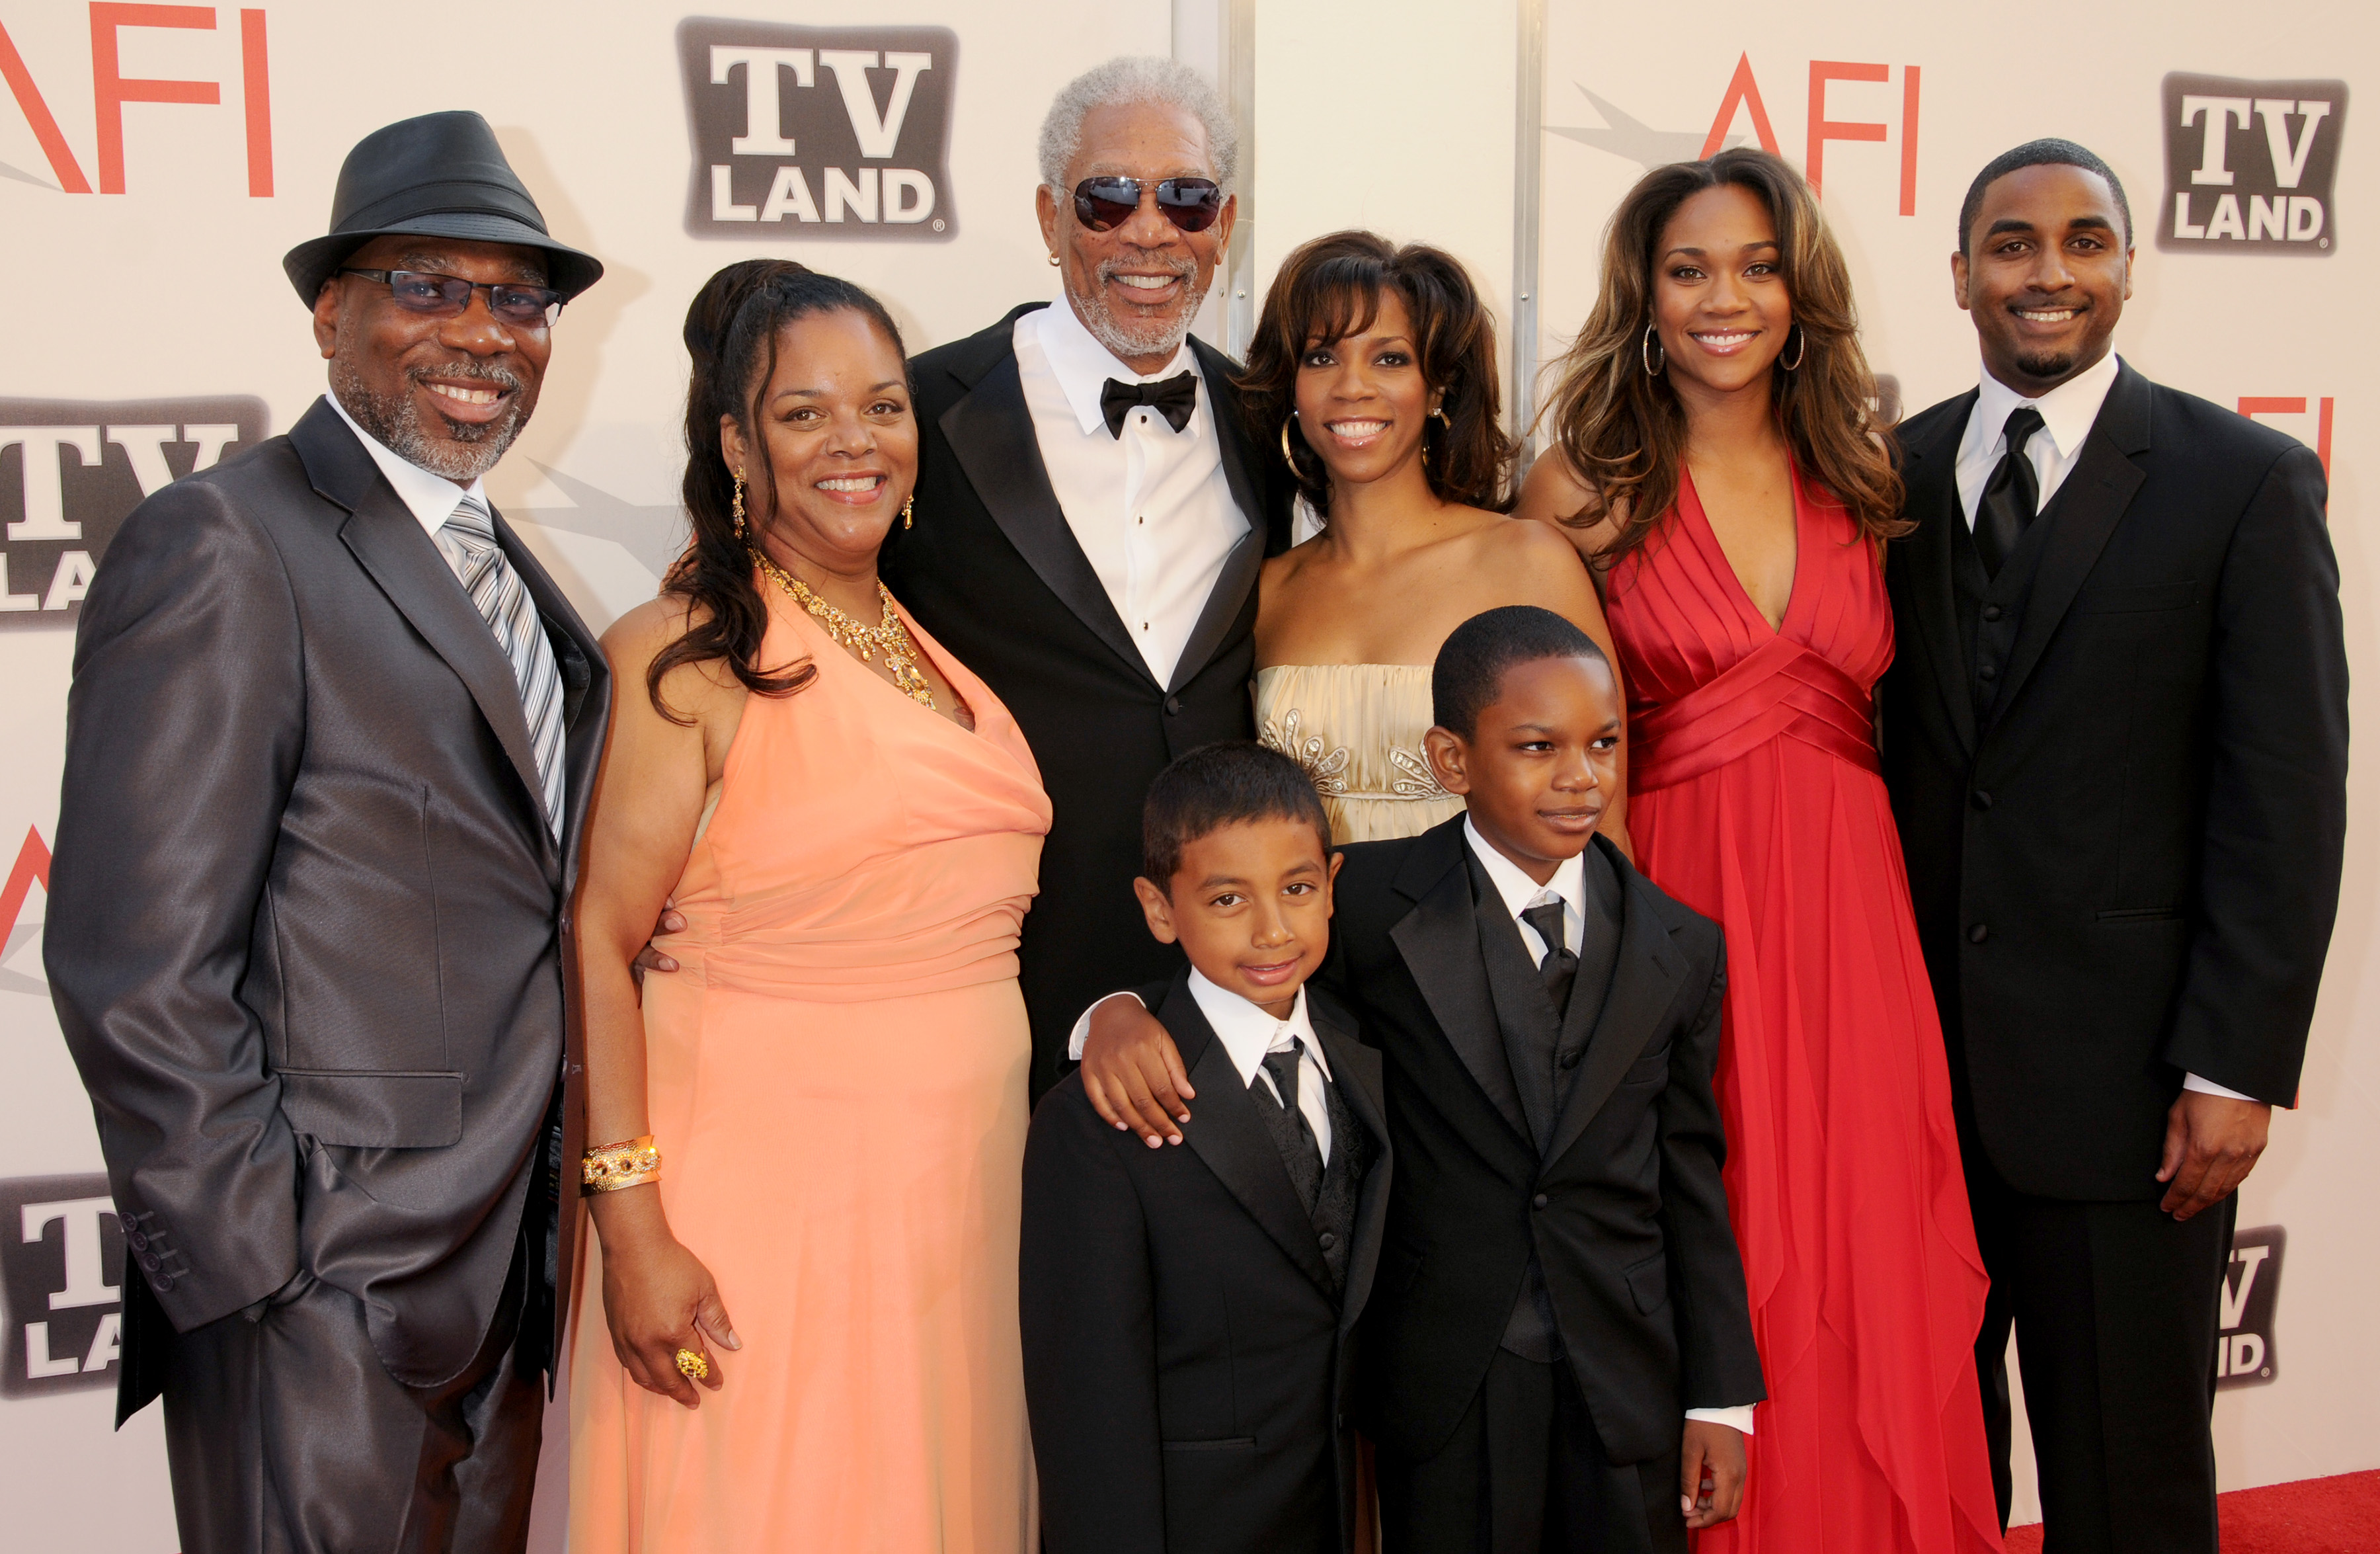 Morgan and Alfonso Freeman with their family at the 39th AFI Life Achievement Awards in Culver City, California on June 9, 2011 | Source: Getty Images